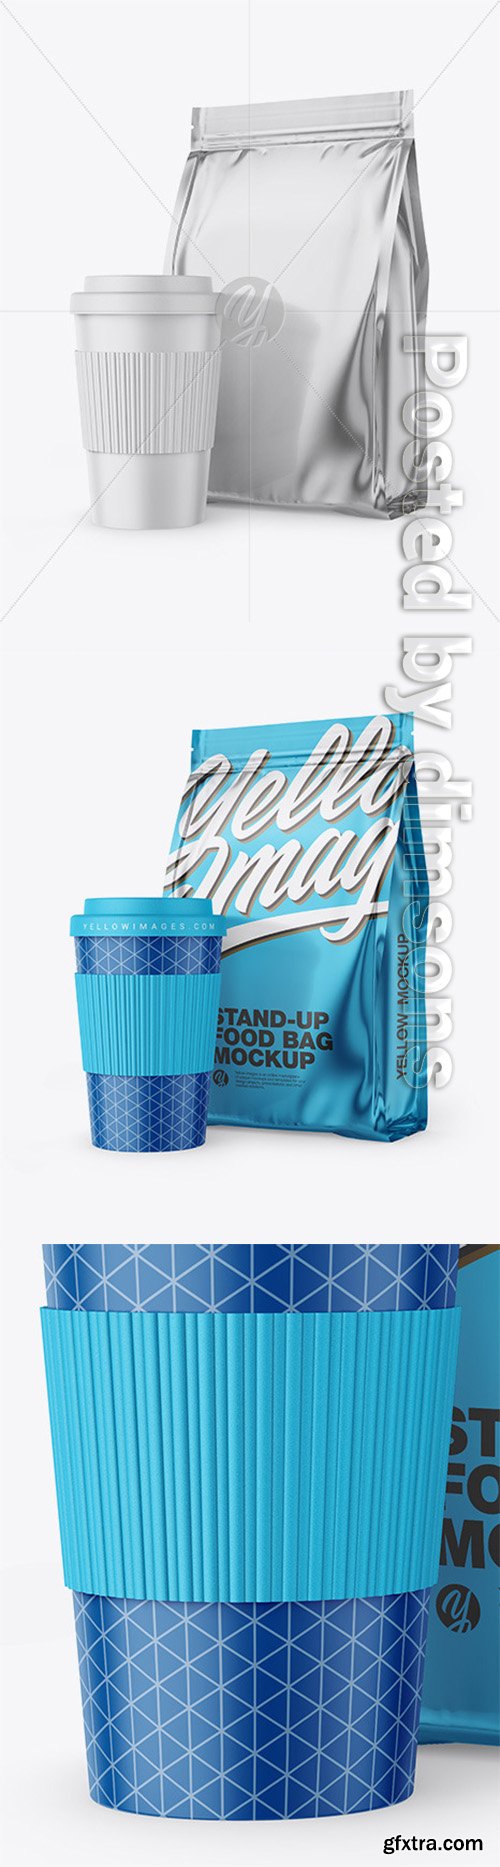 Metallic Stand-Up Bag with Coffee Cup Mockup 65091